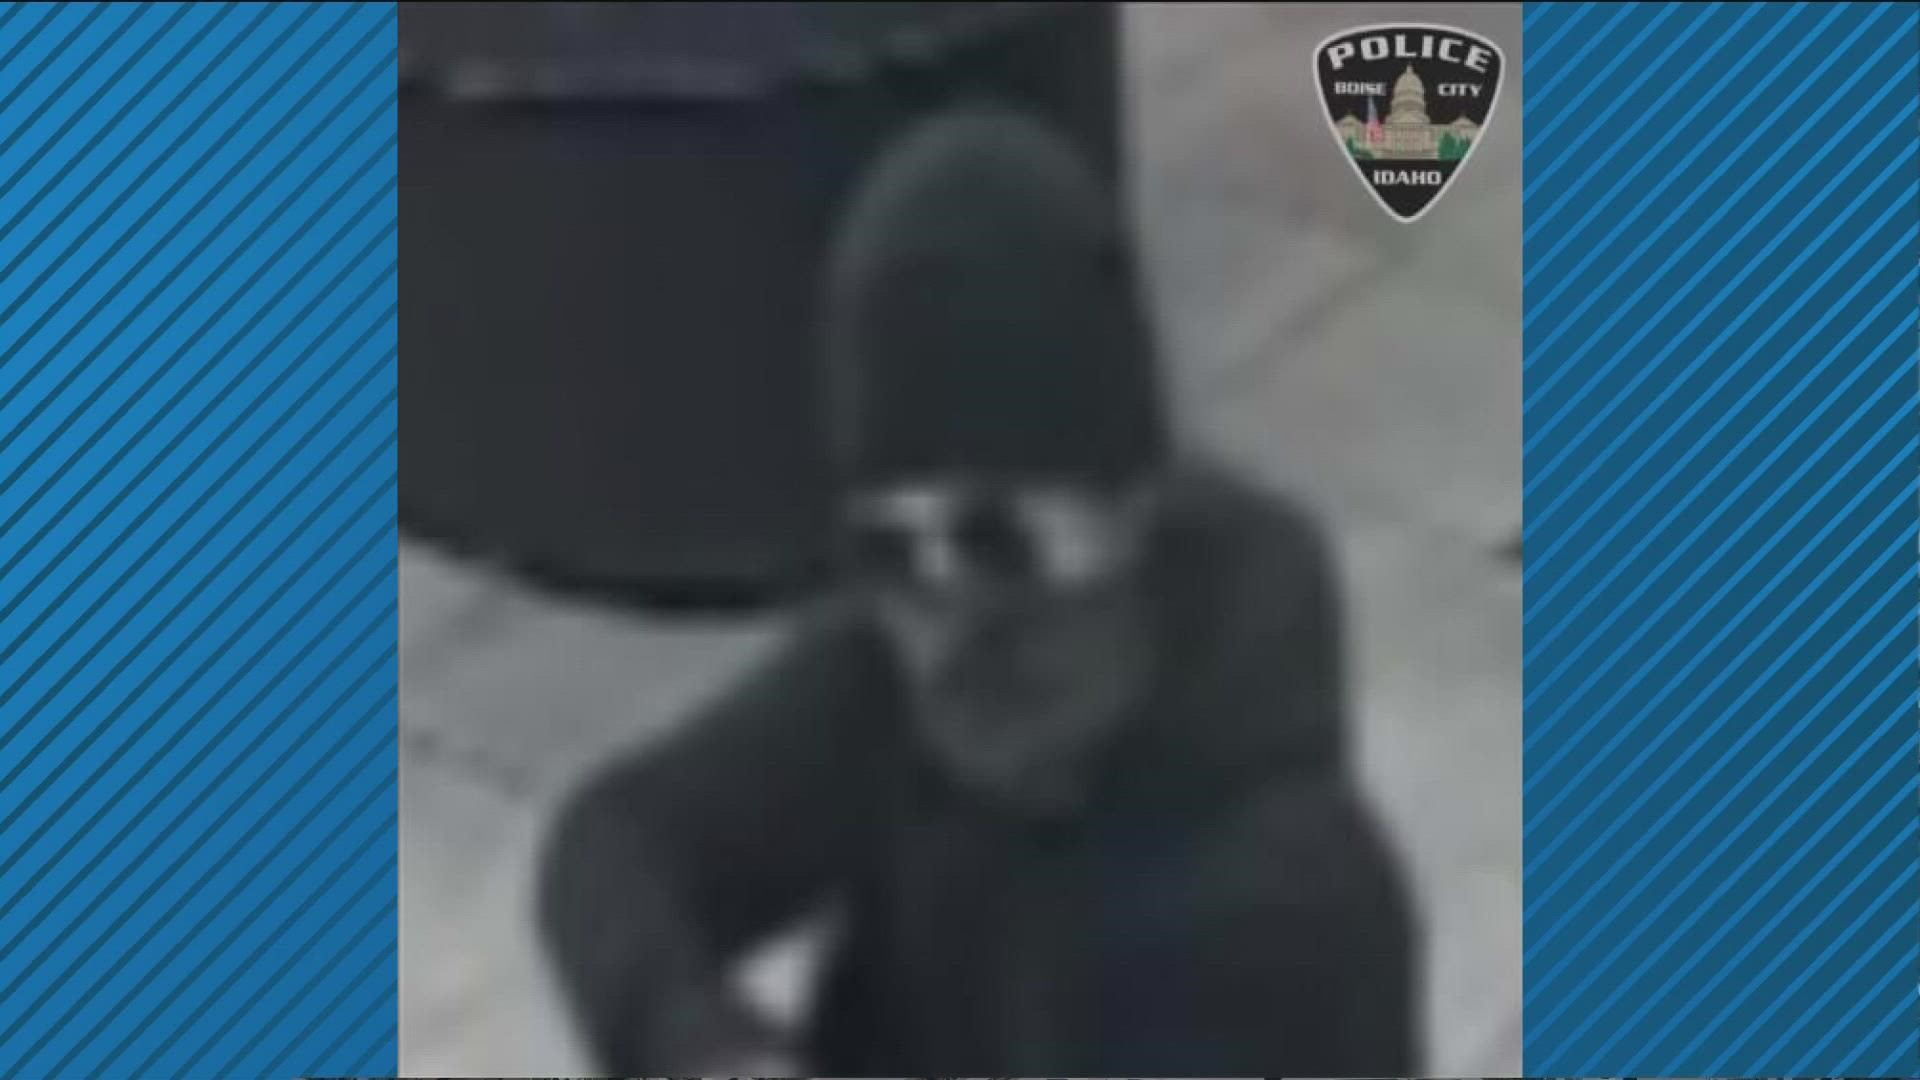 According to Boise Police, an armed man entered a business and demanded money Wednesday morning. The suspect is described as 5-foot-6, 160 pounds, in his late 20s.